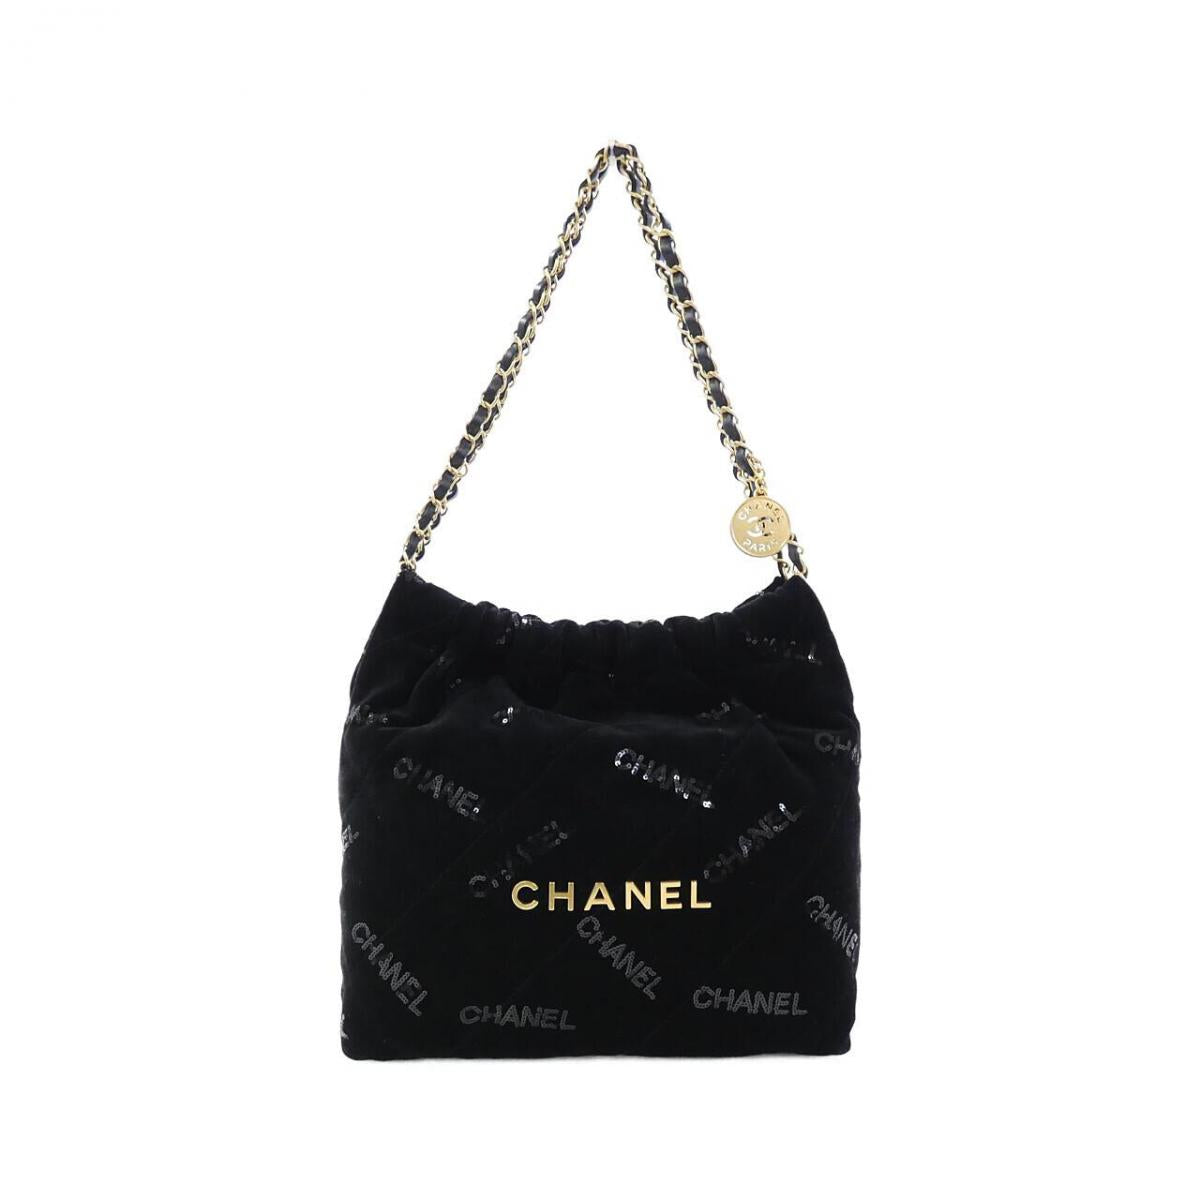 Top 7 Most Affordable Chanel Bags